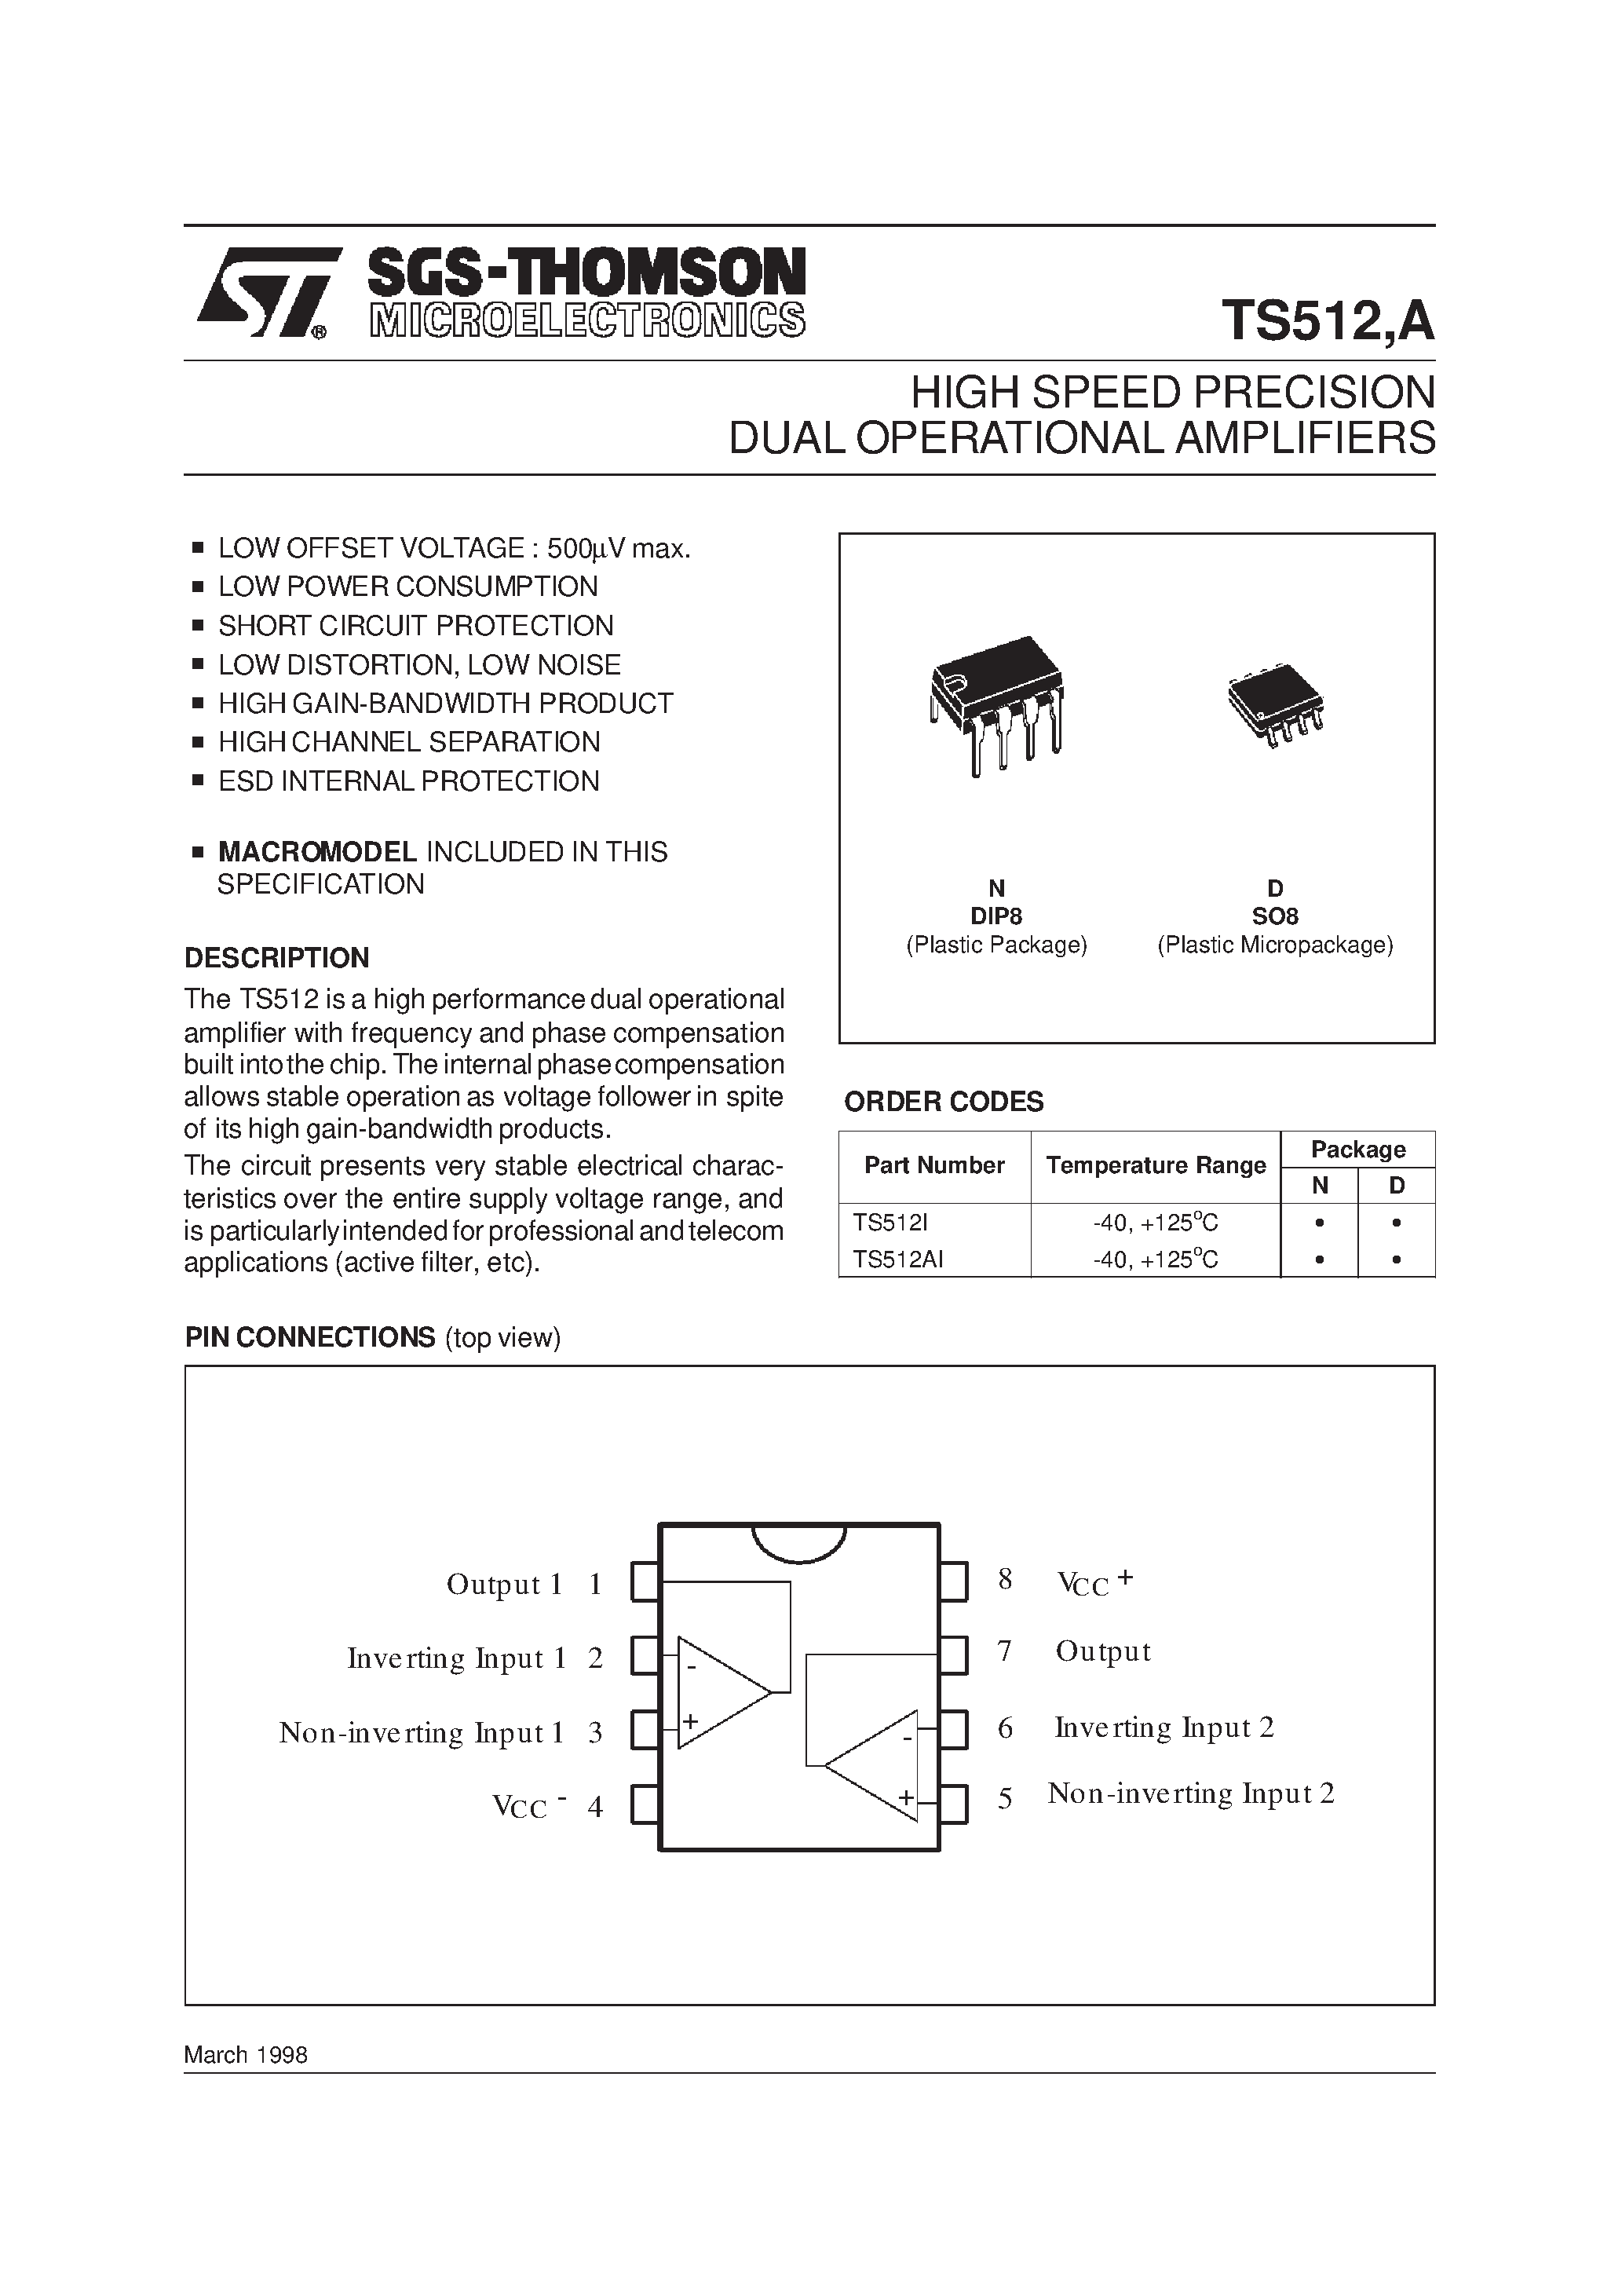 Datasheet TS512ID - HIGH SPEED PRECISION DUAL OPERATIONAL AMPLIFIERS page 1